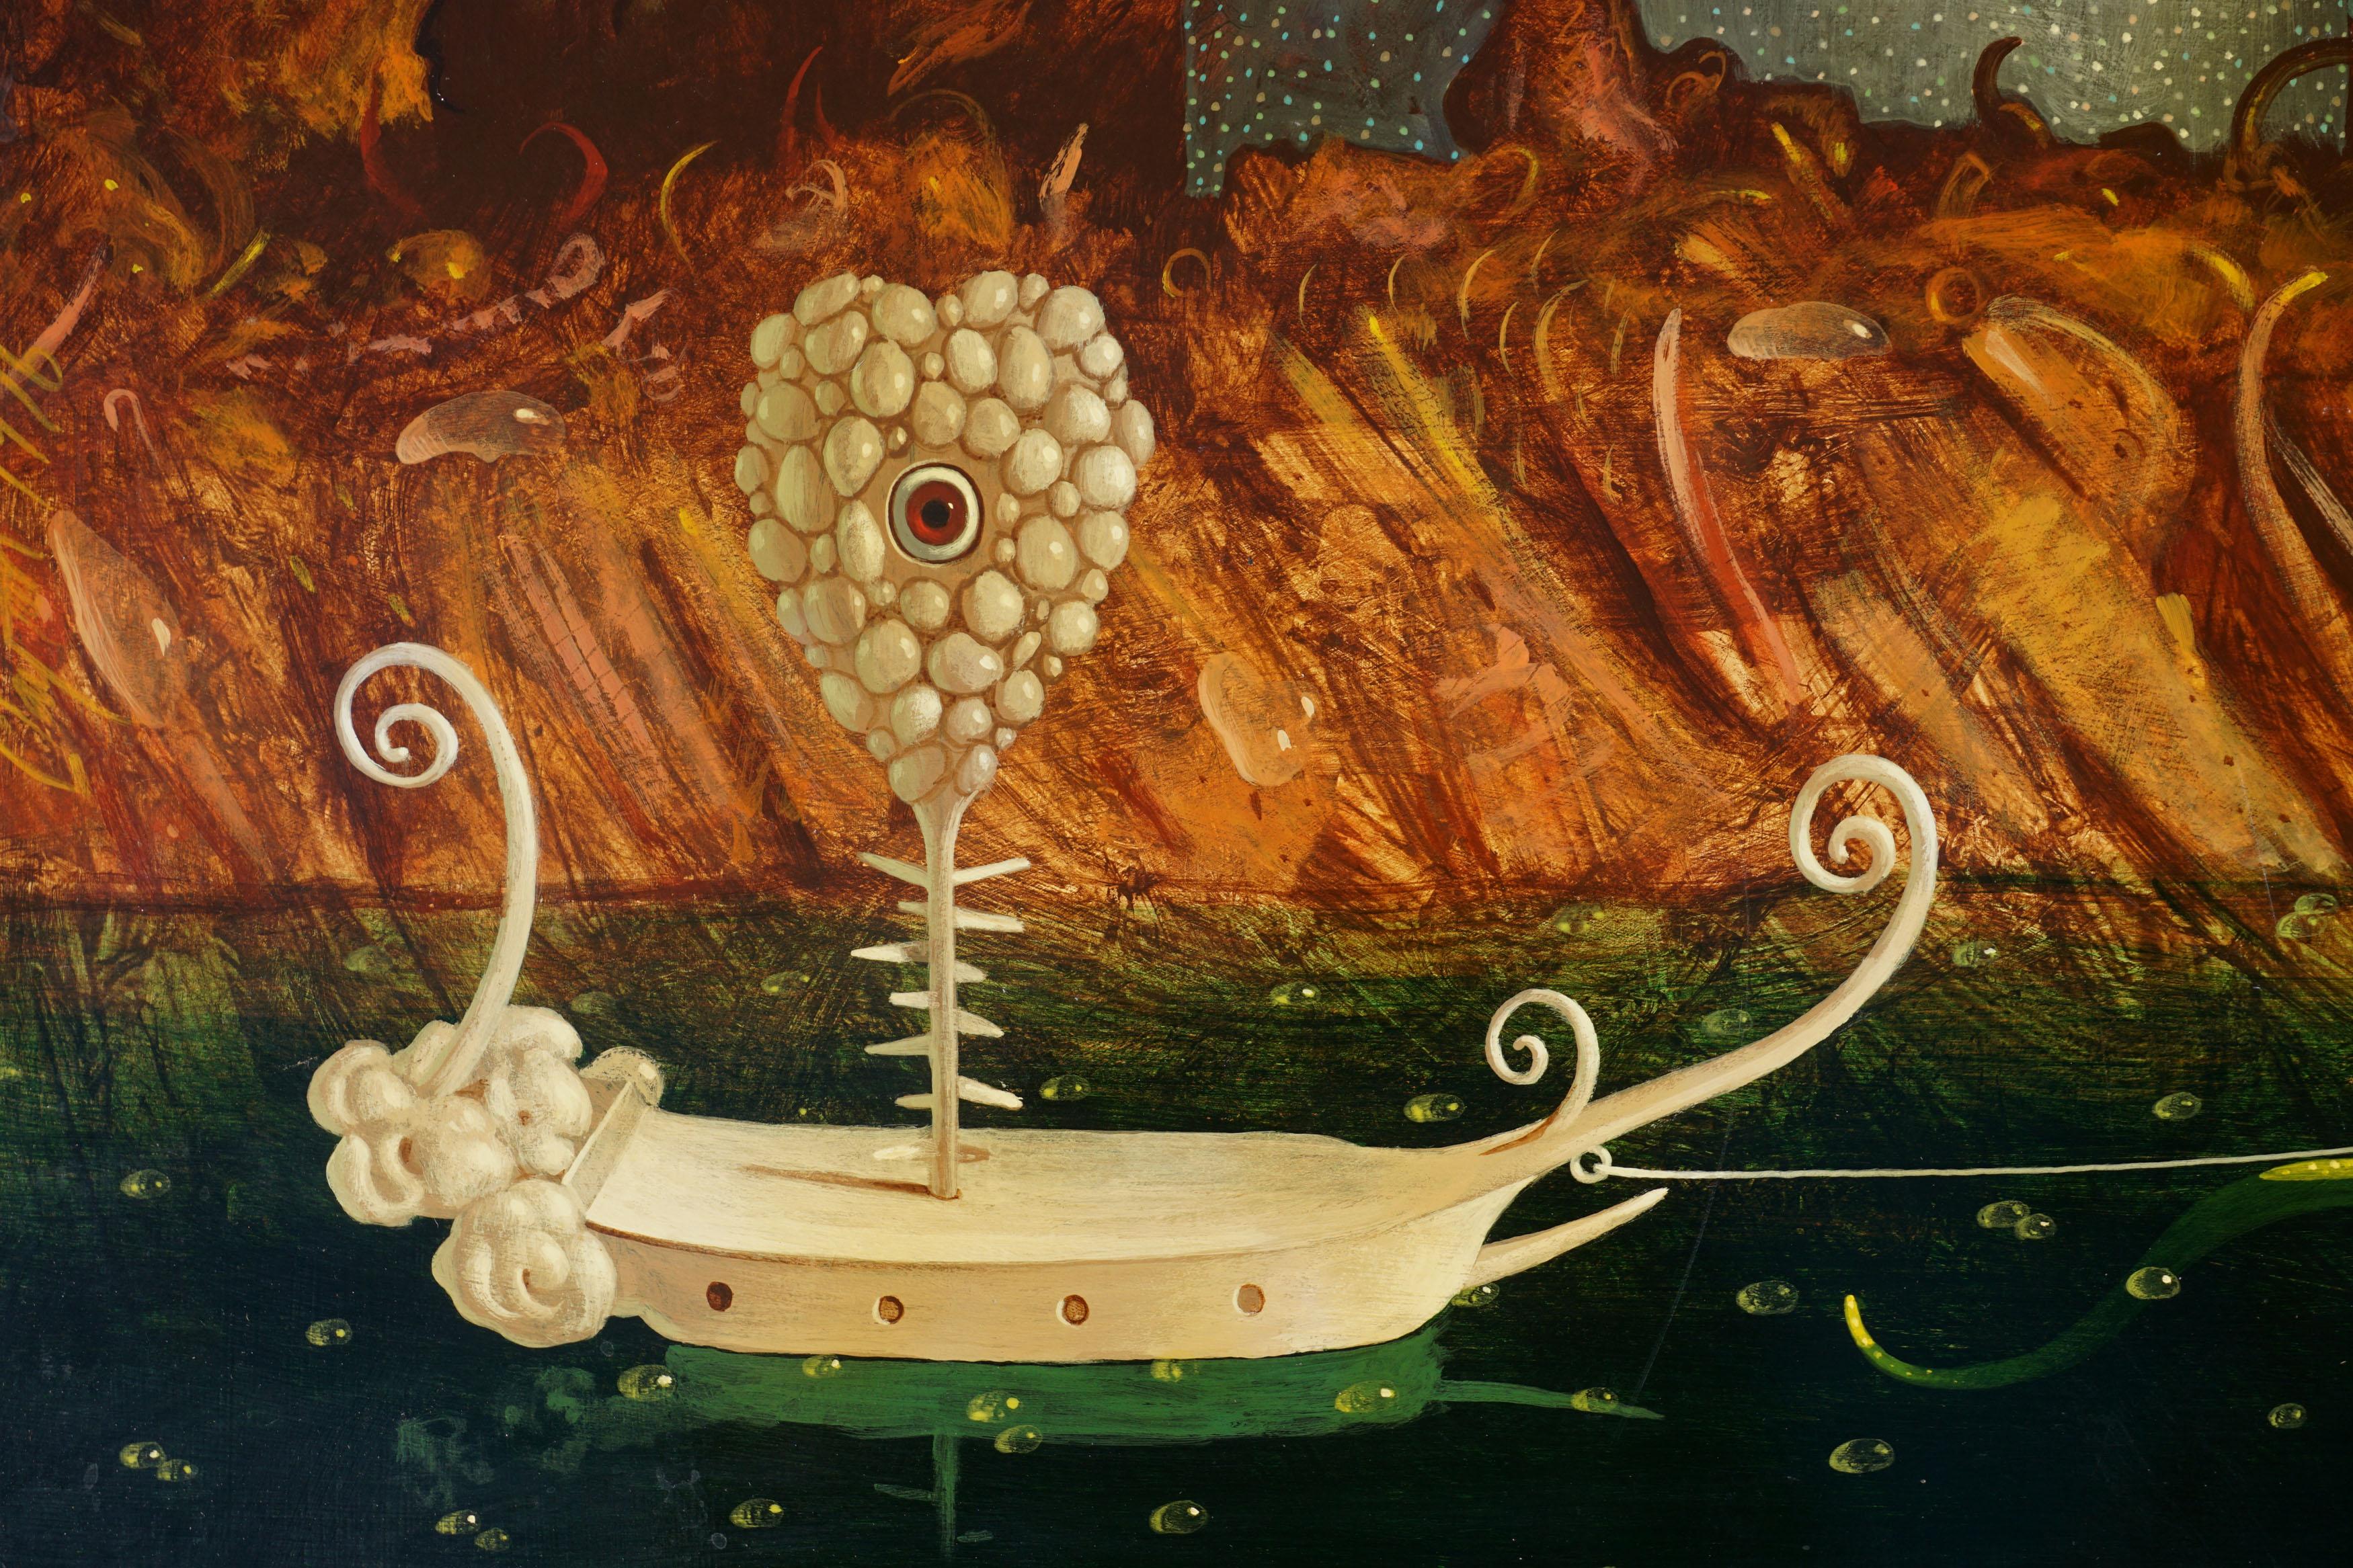 By The River - Surrealist Painting by Clayton Anderson